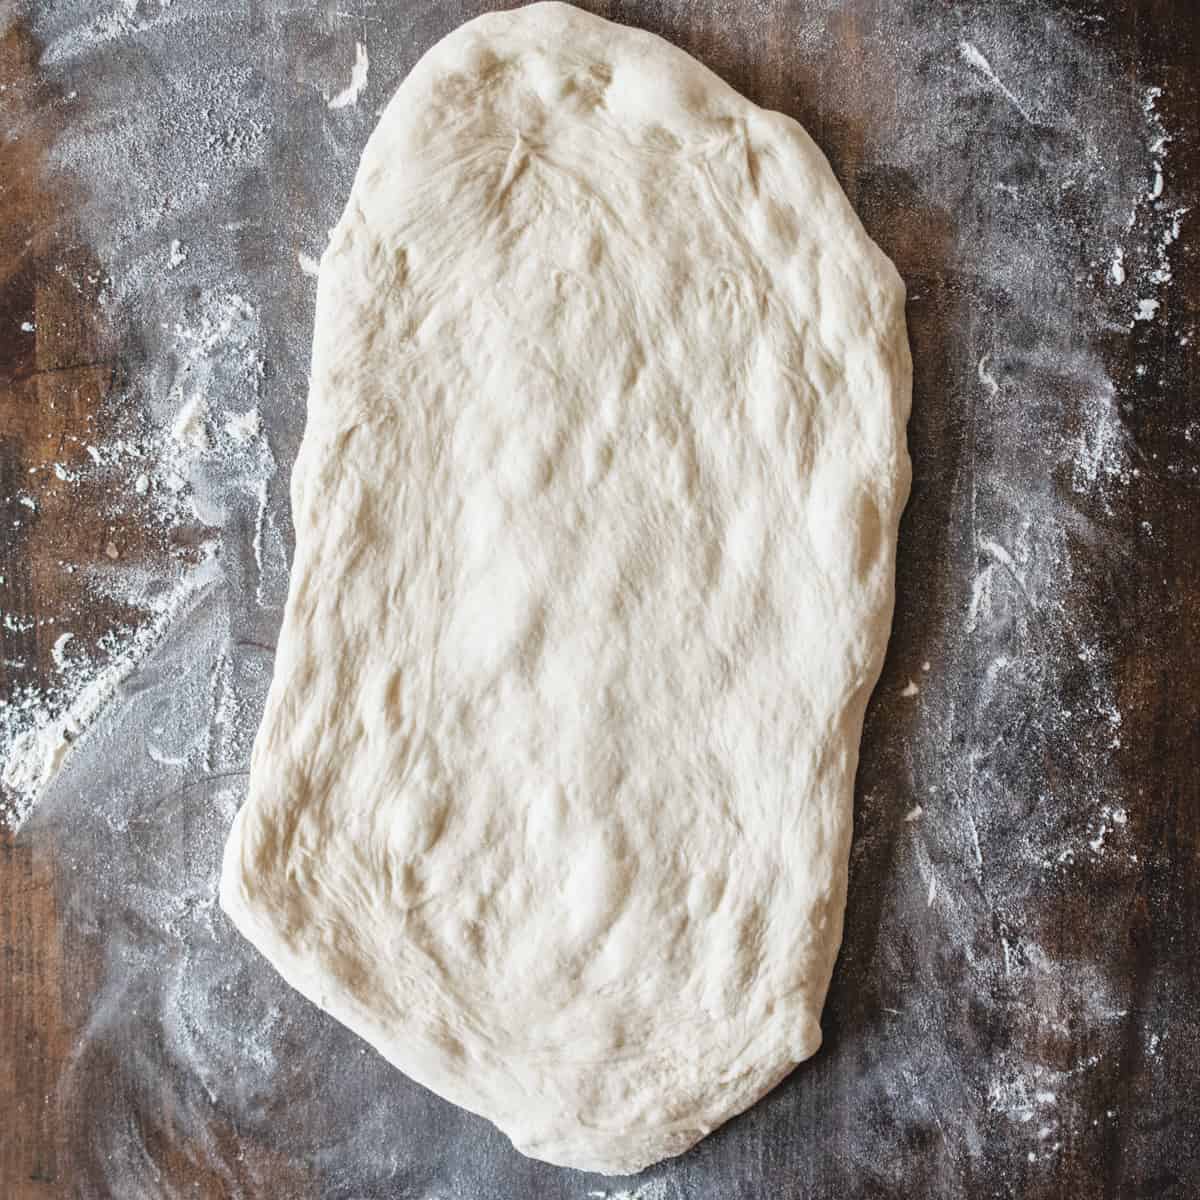 Rolled out pizza dough on a floured wooden cutting board